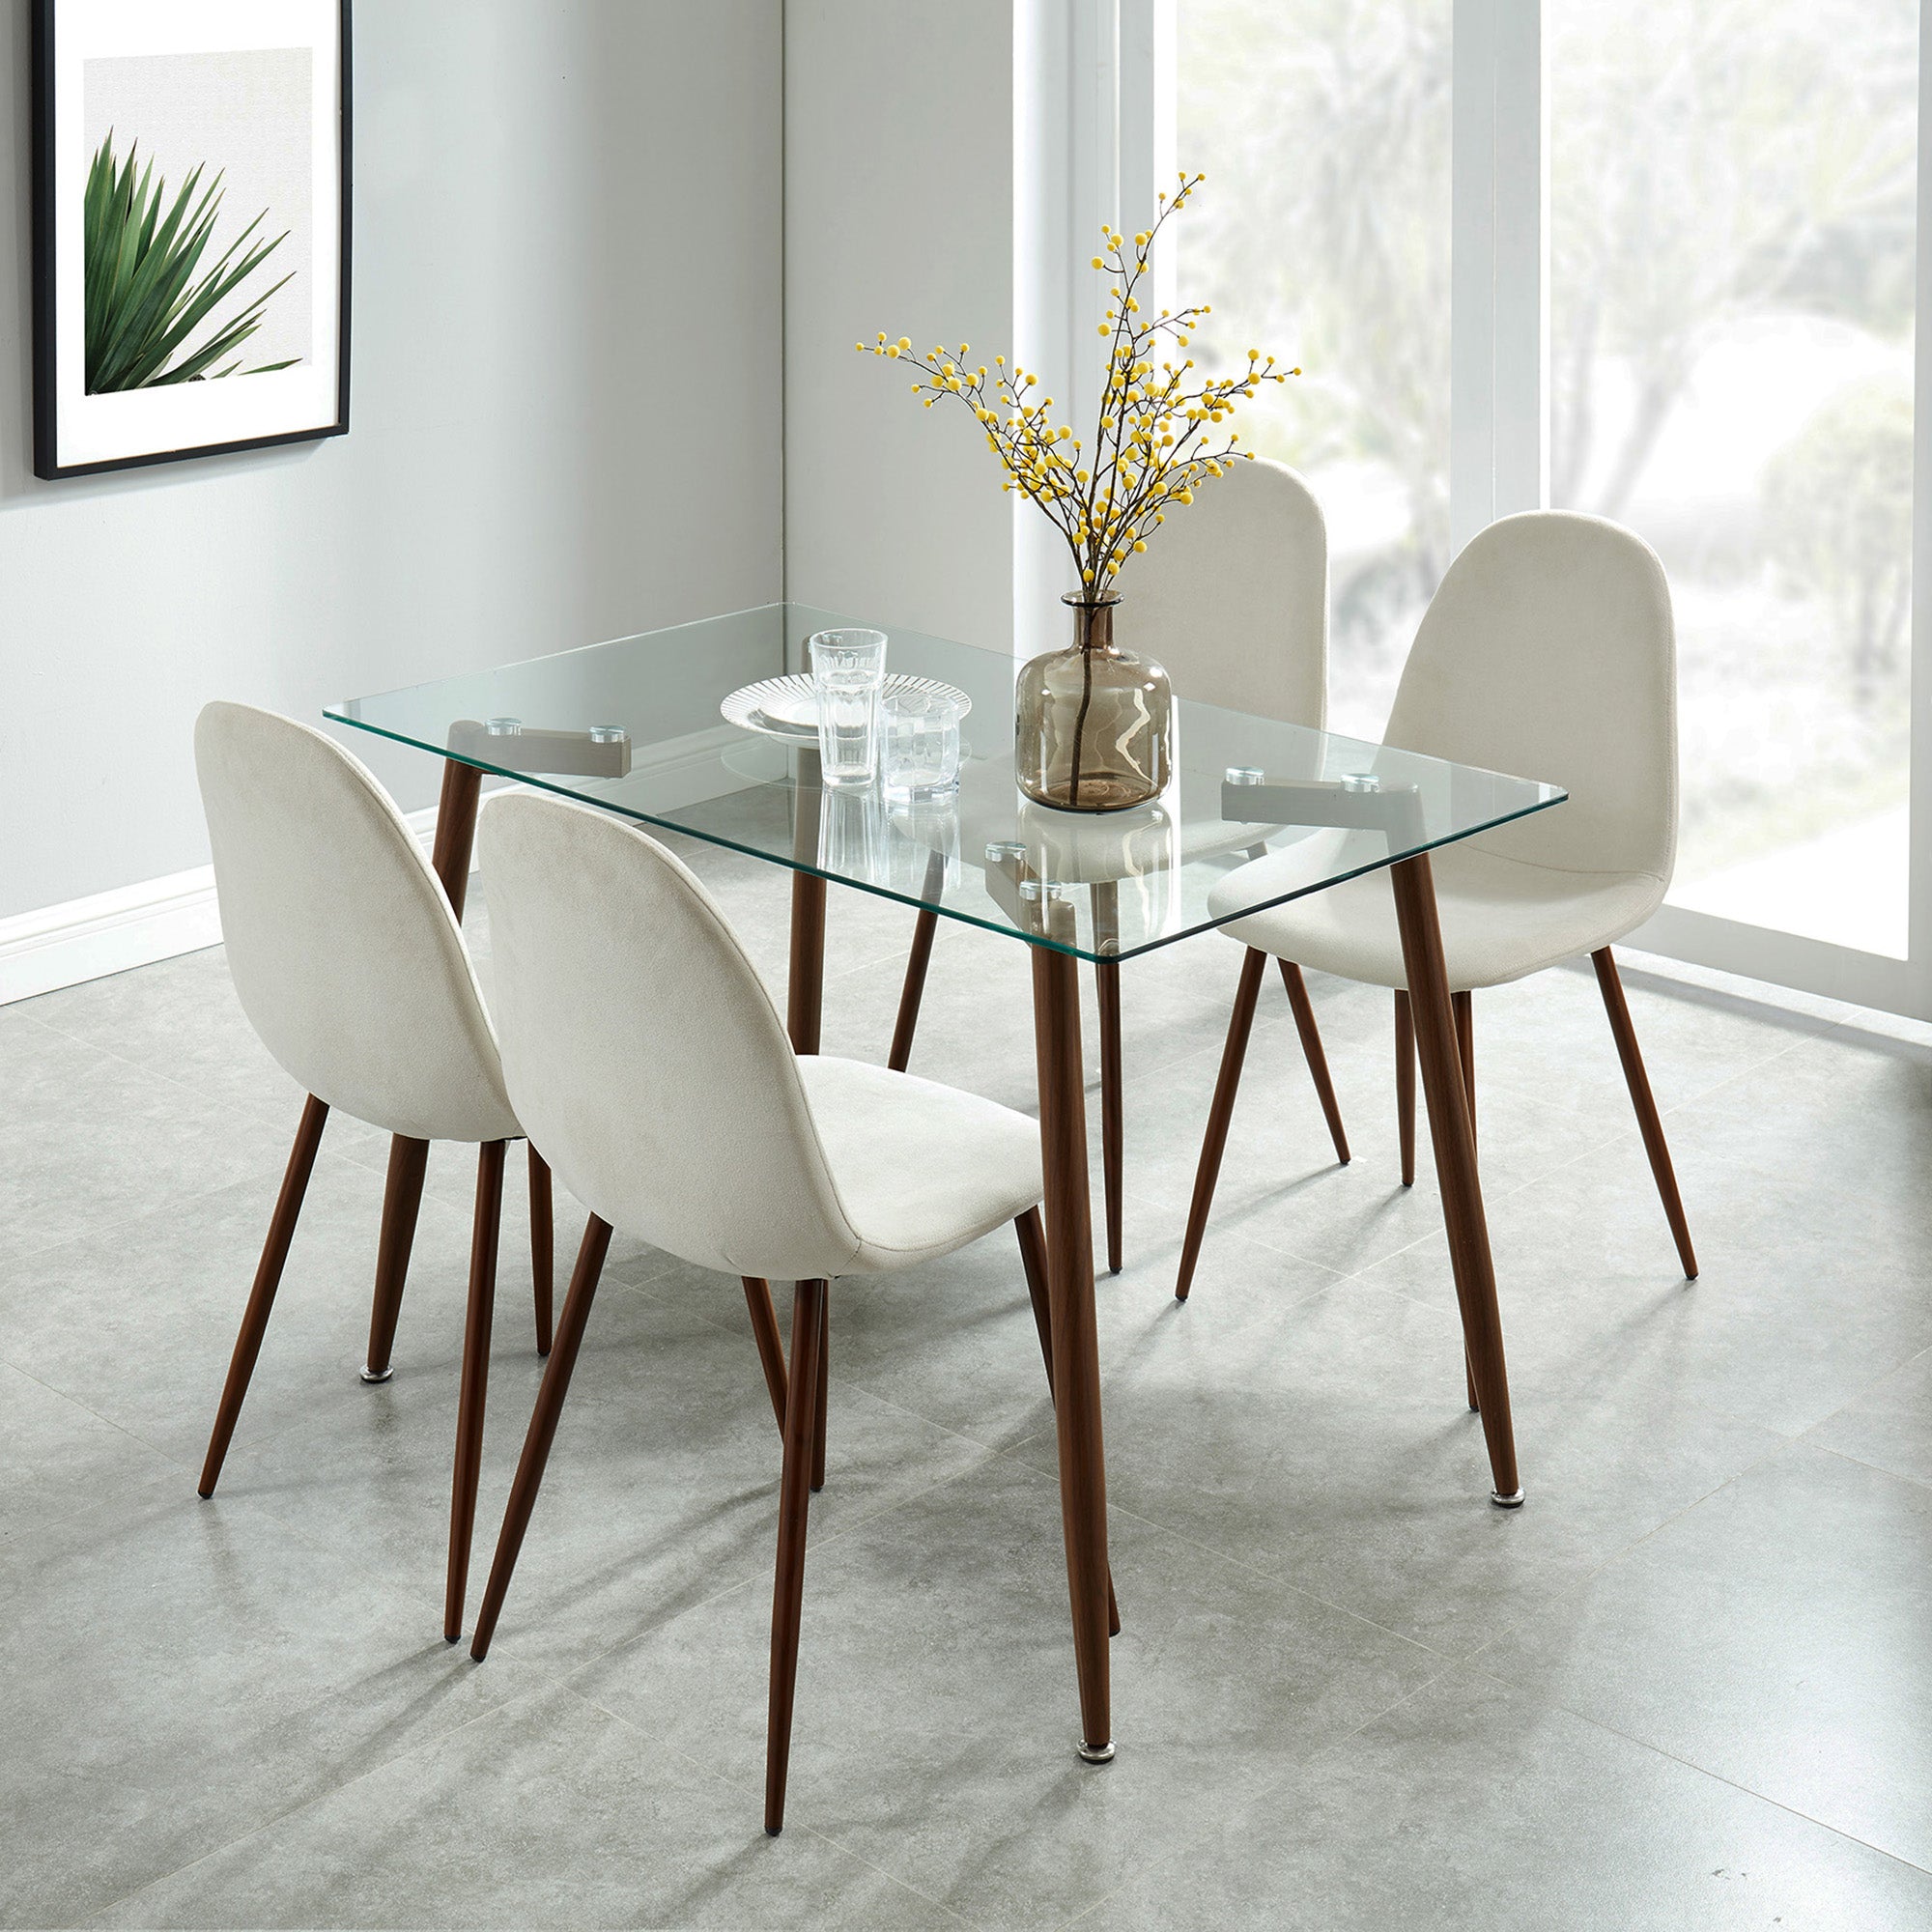 ABBOT 48" GLASS TABLE / LYNA BEIGE CHAIRS - 5PC DINING SET